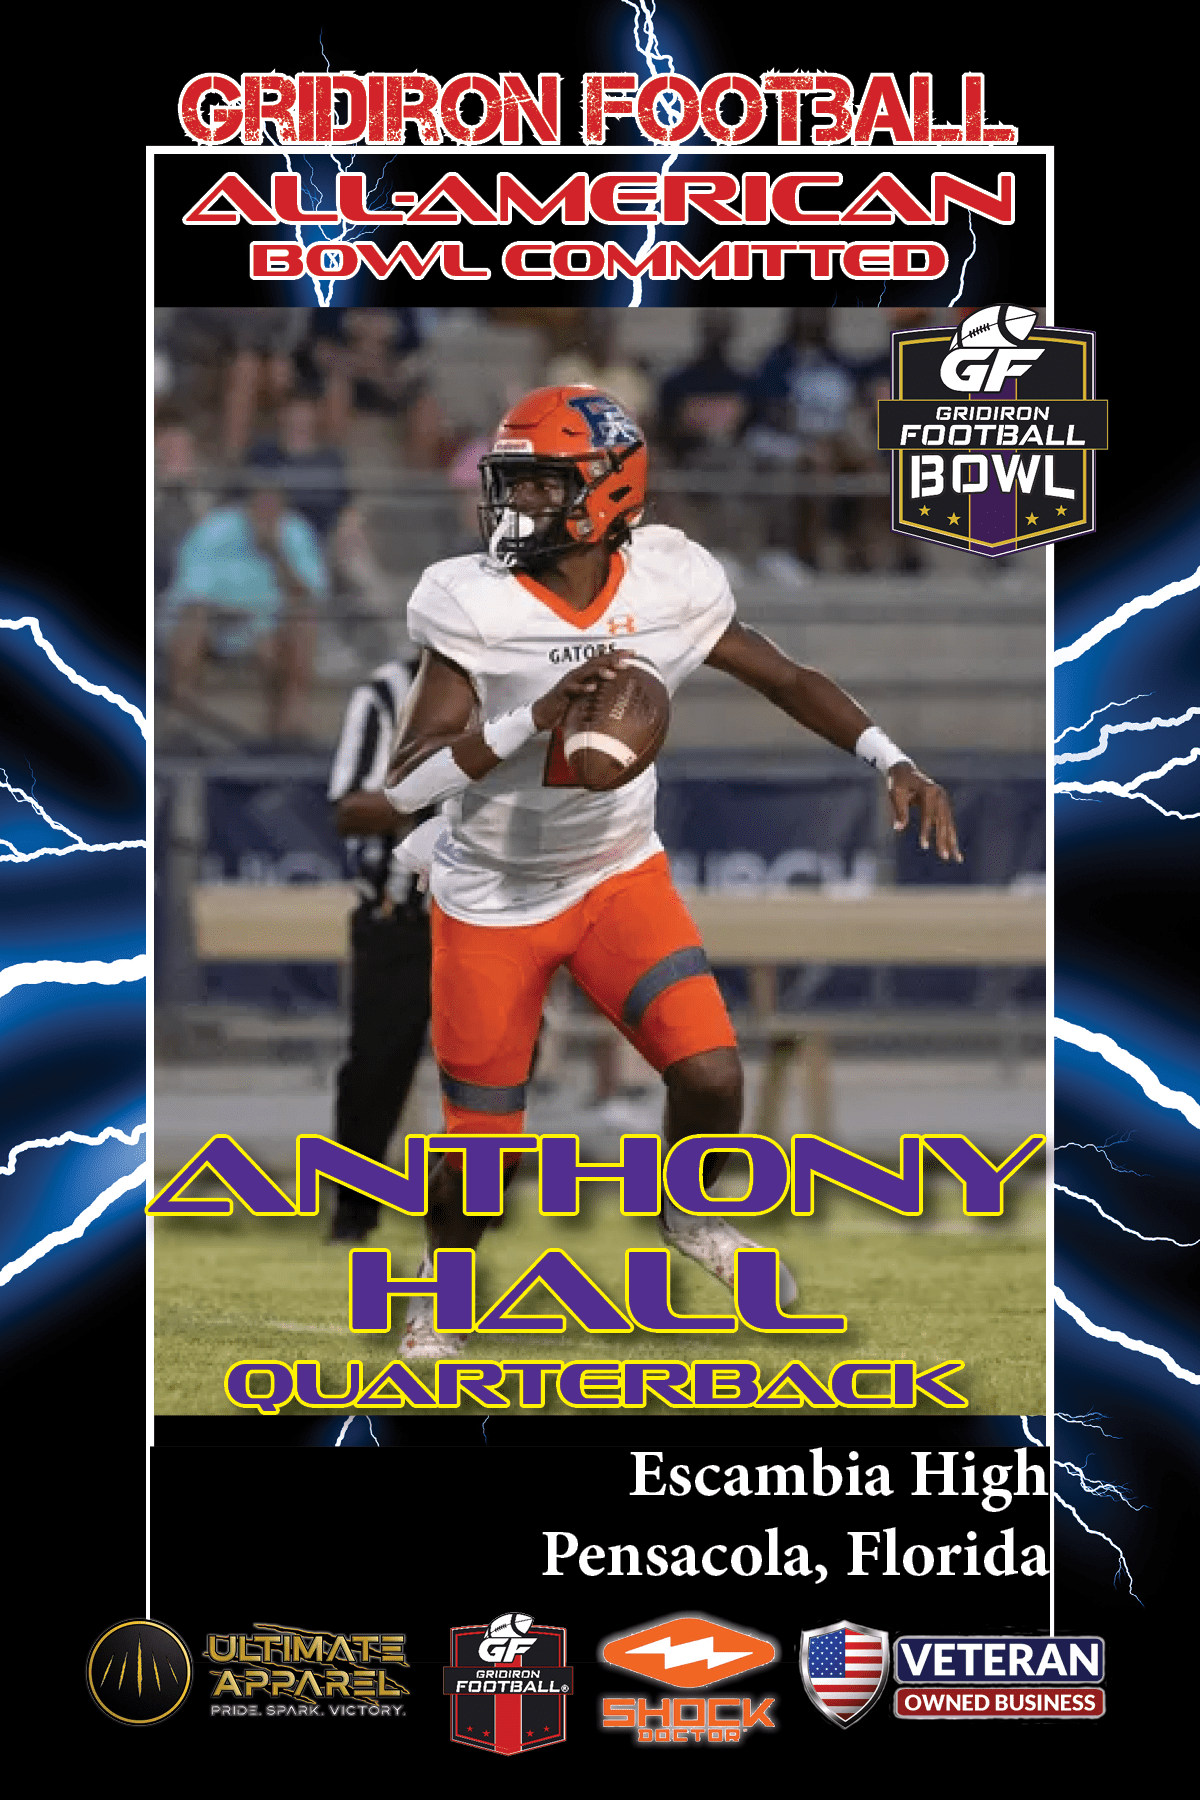 BREAKING NEWS: Escambia High School (Pensacola, FL) QB Anthony Hall Commits To The Gridiron Football All-American Bowl Game